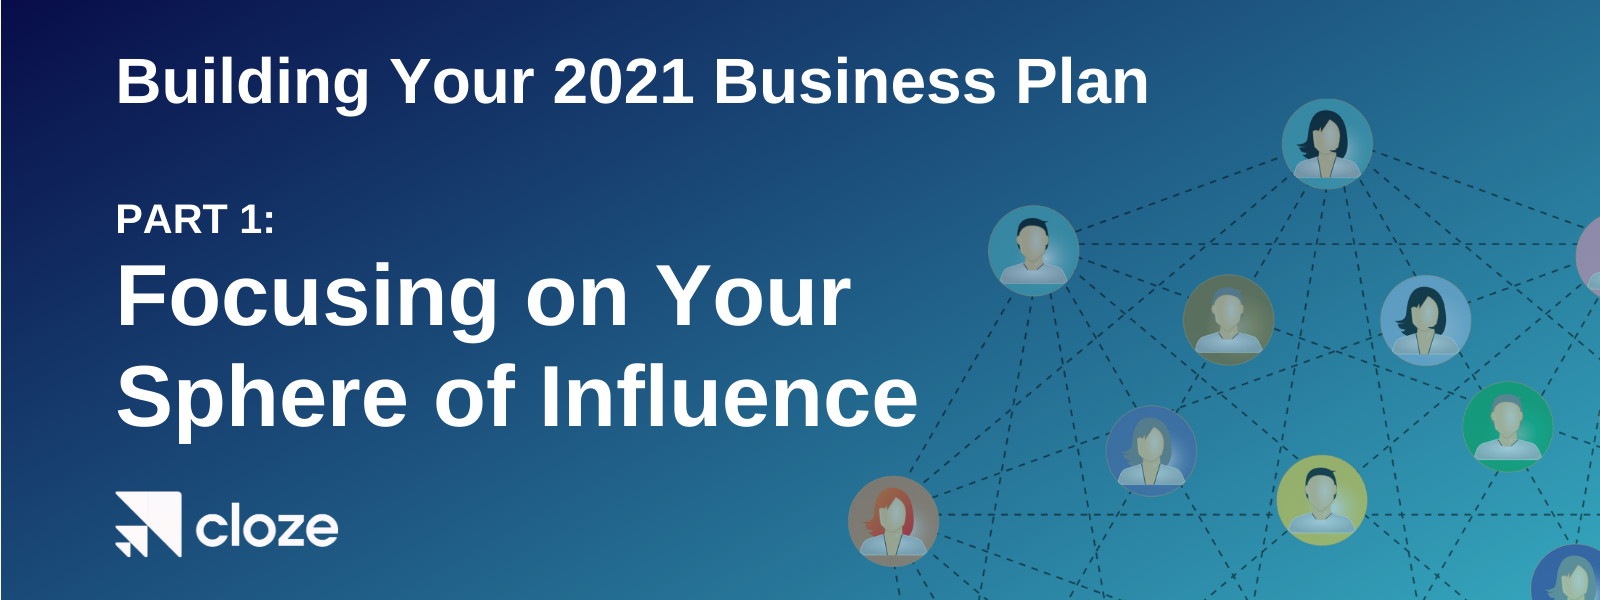 Building your 2021 Business Plan. 
Part 1: Focusing on your sphere of influence. 